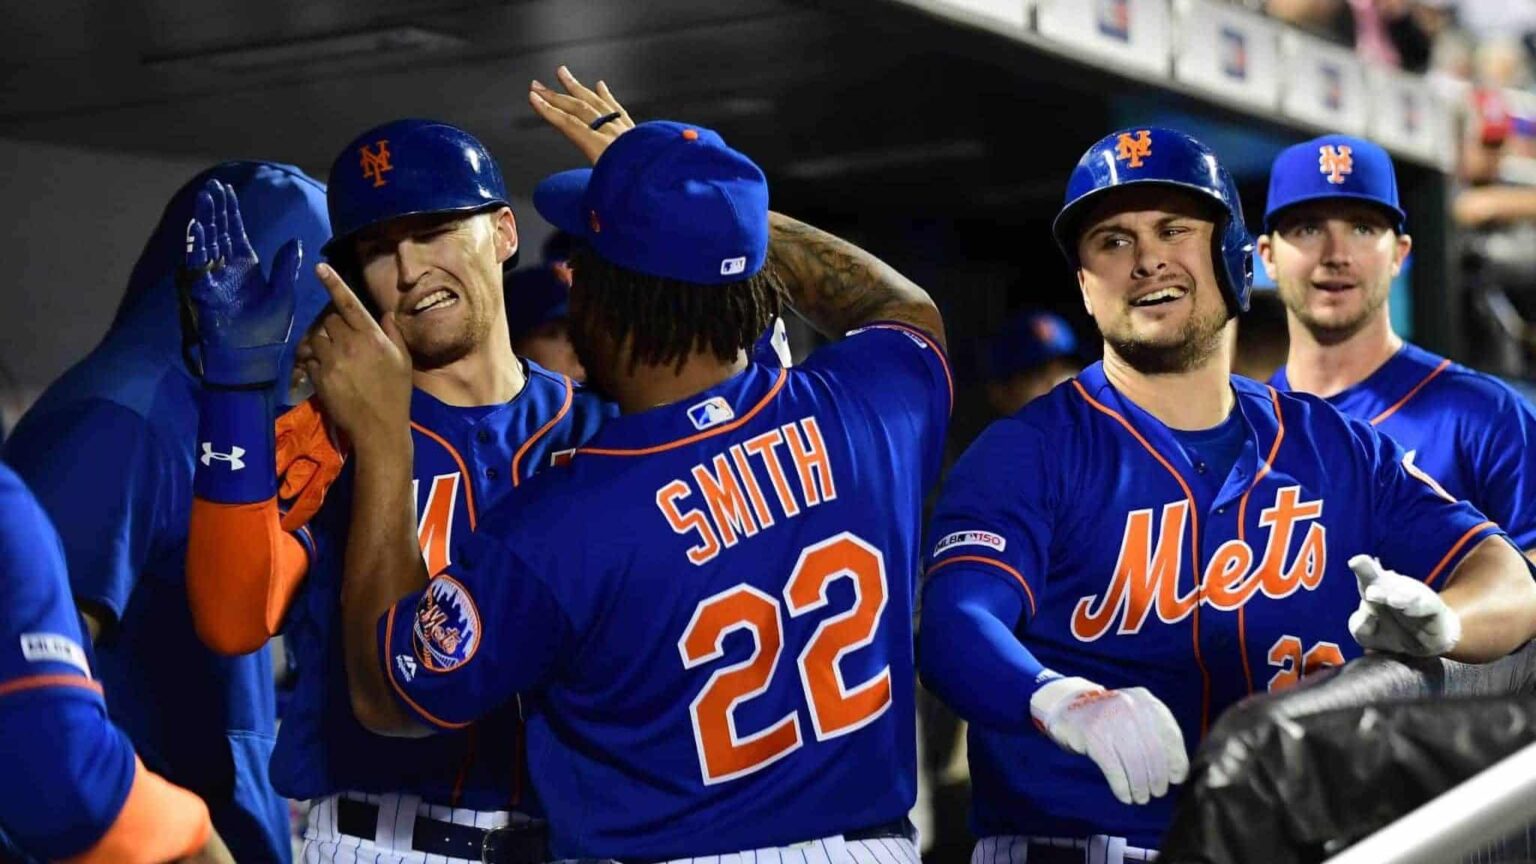 The New York Mets are adding new players to the team this year. What does this news mean for the future of the team?